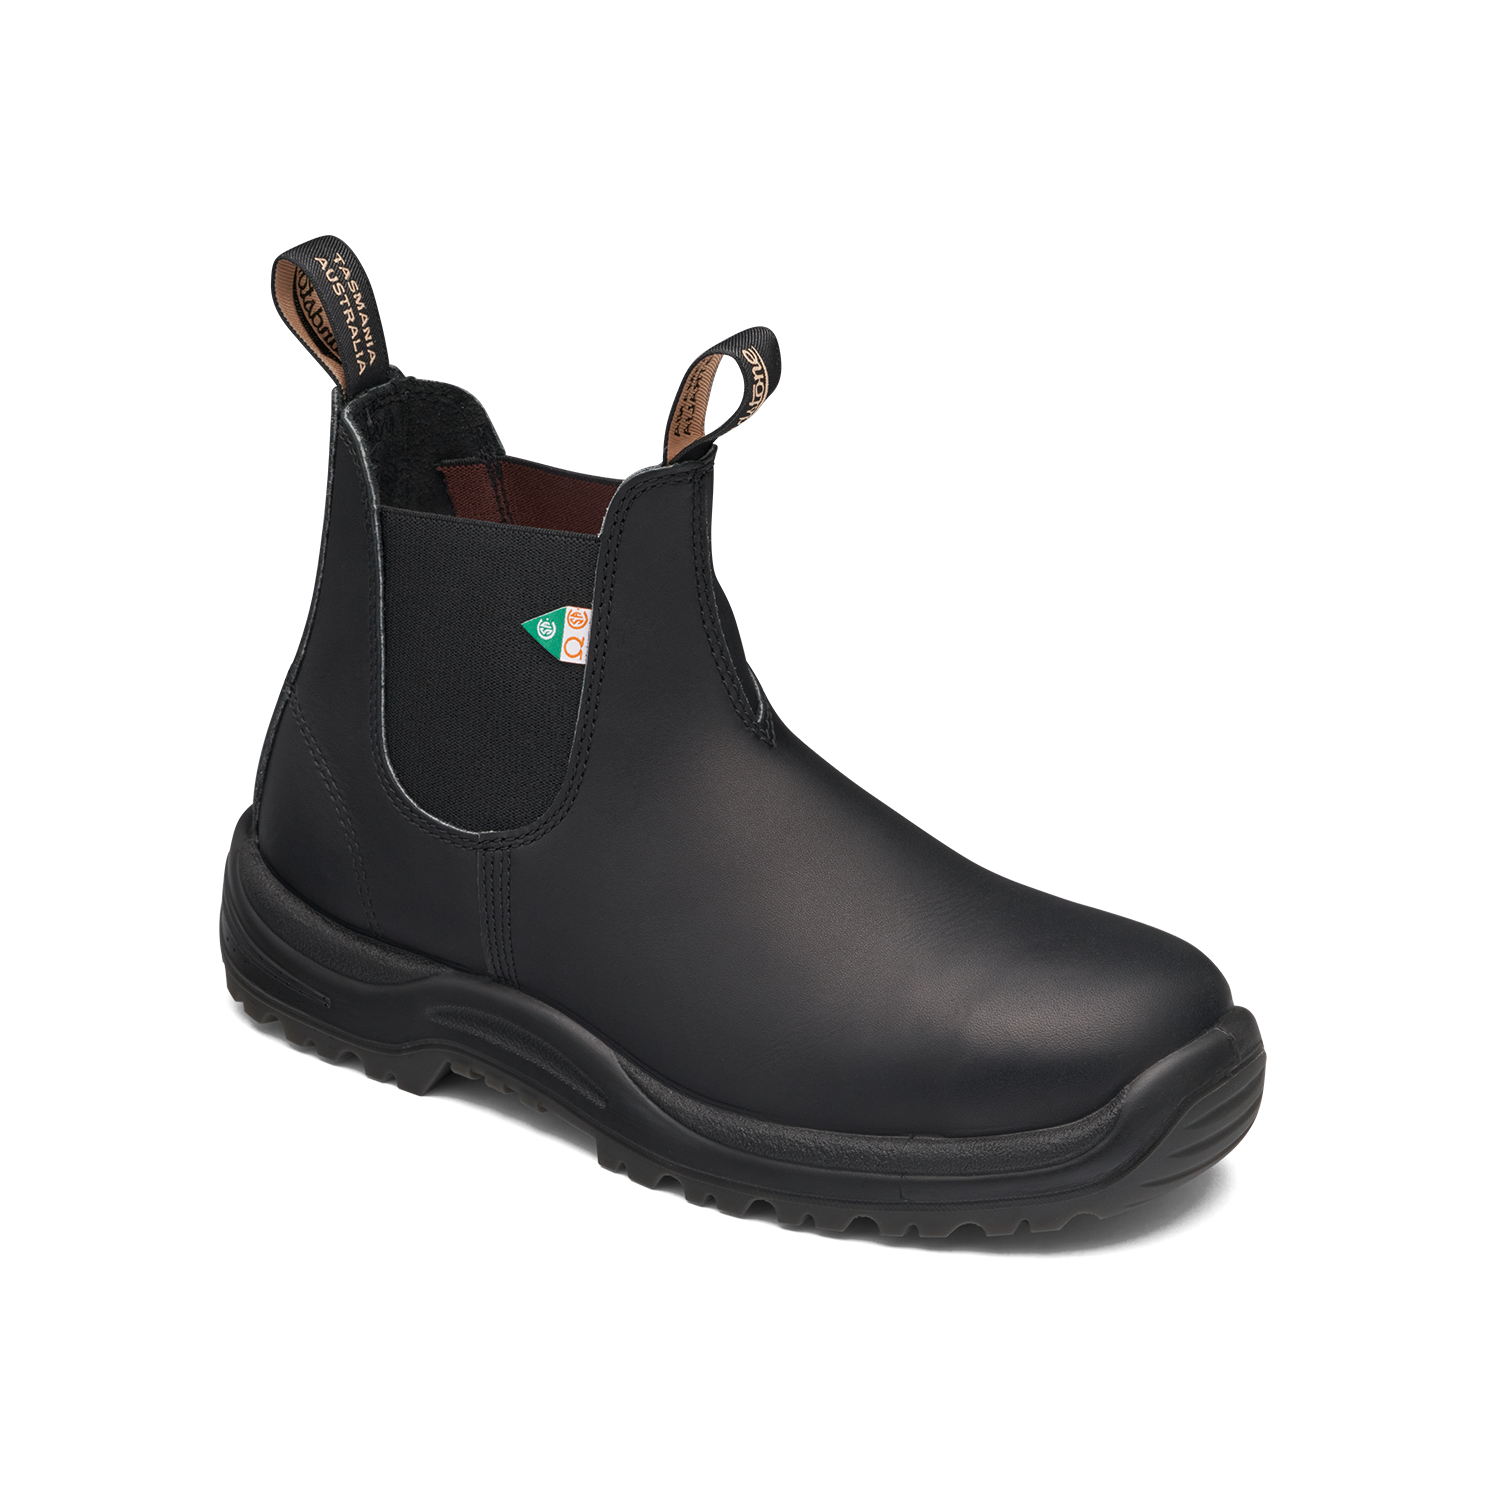 Blundstone 167 Work Safety Boot Rubber Toe Cap Stout Brown | lupon.gov.ph